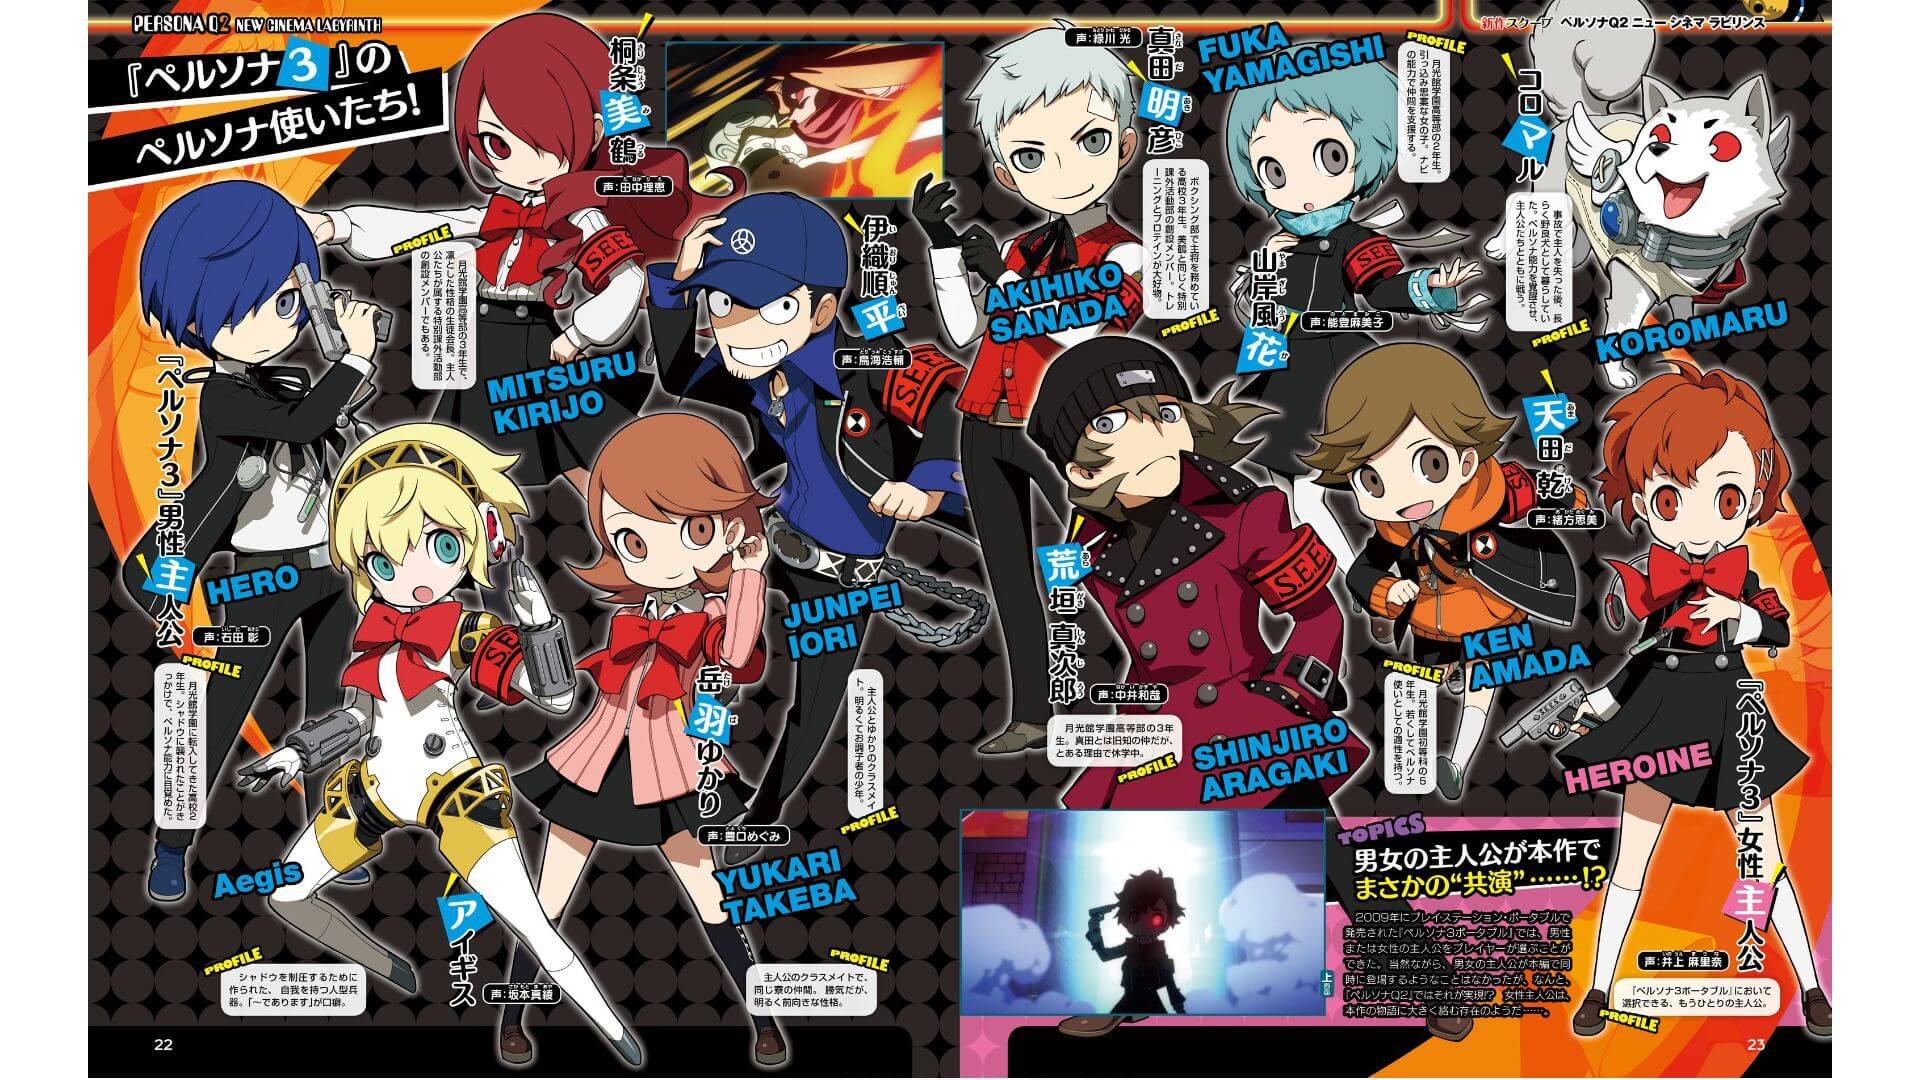 Persona Q2 will Have Big Role for FeMC from P3 and More Other